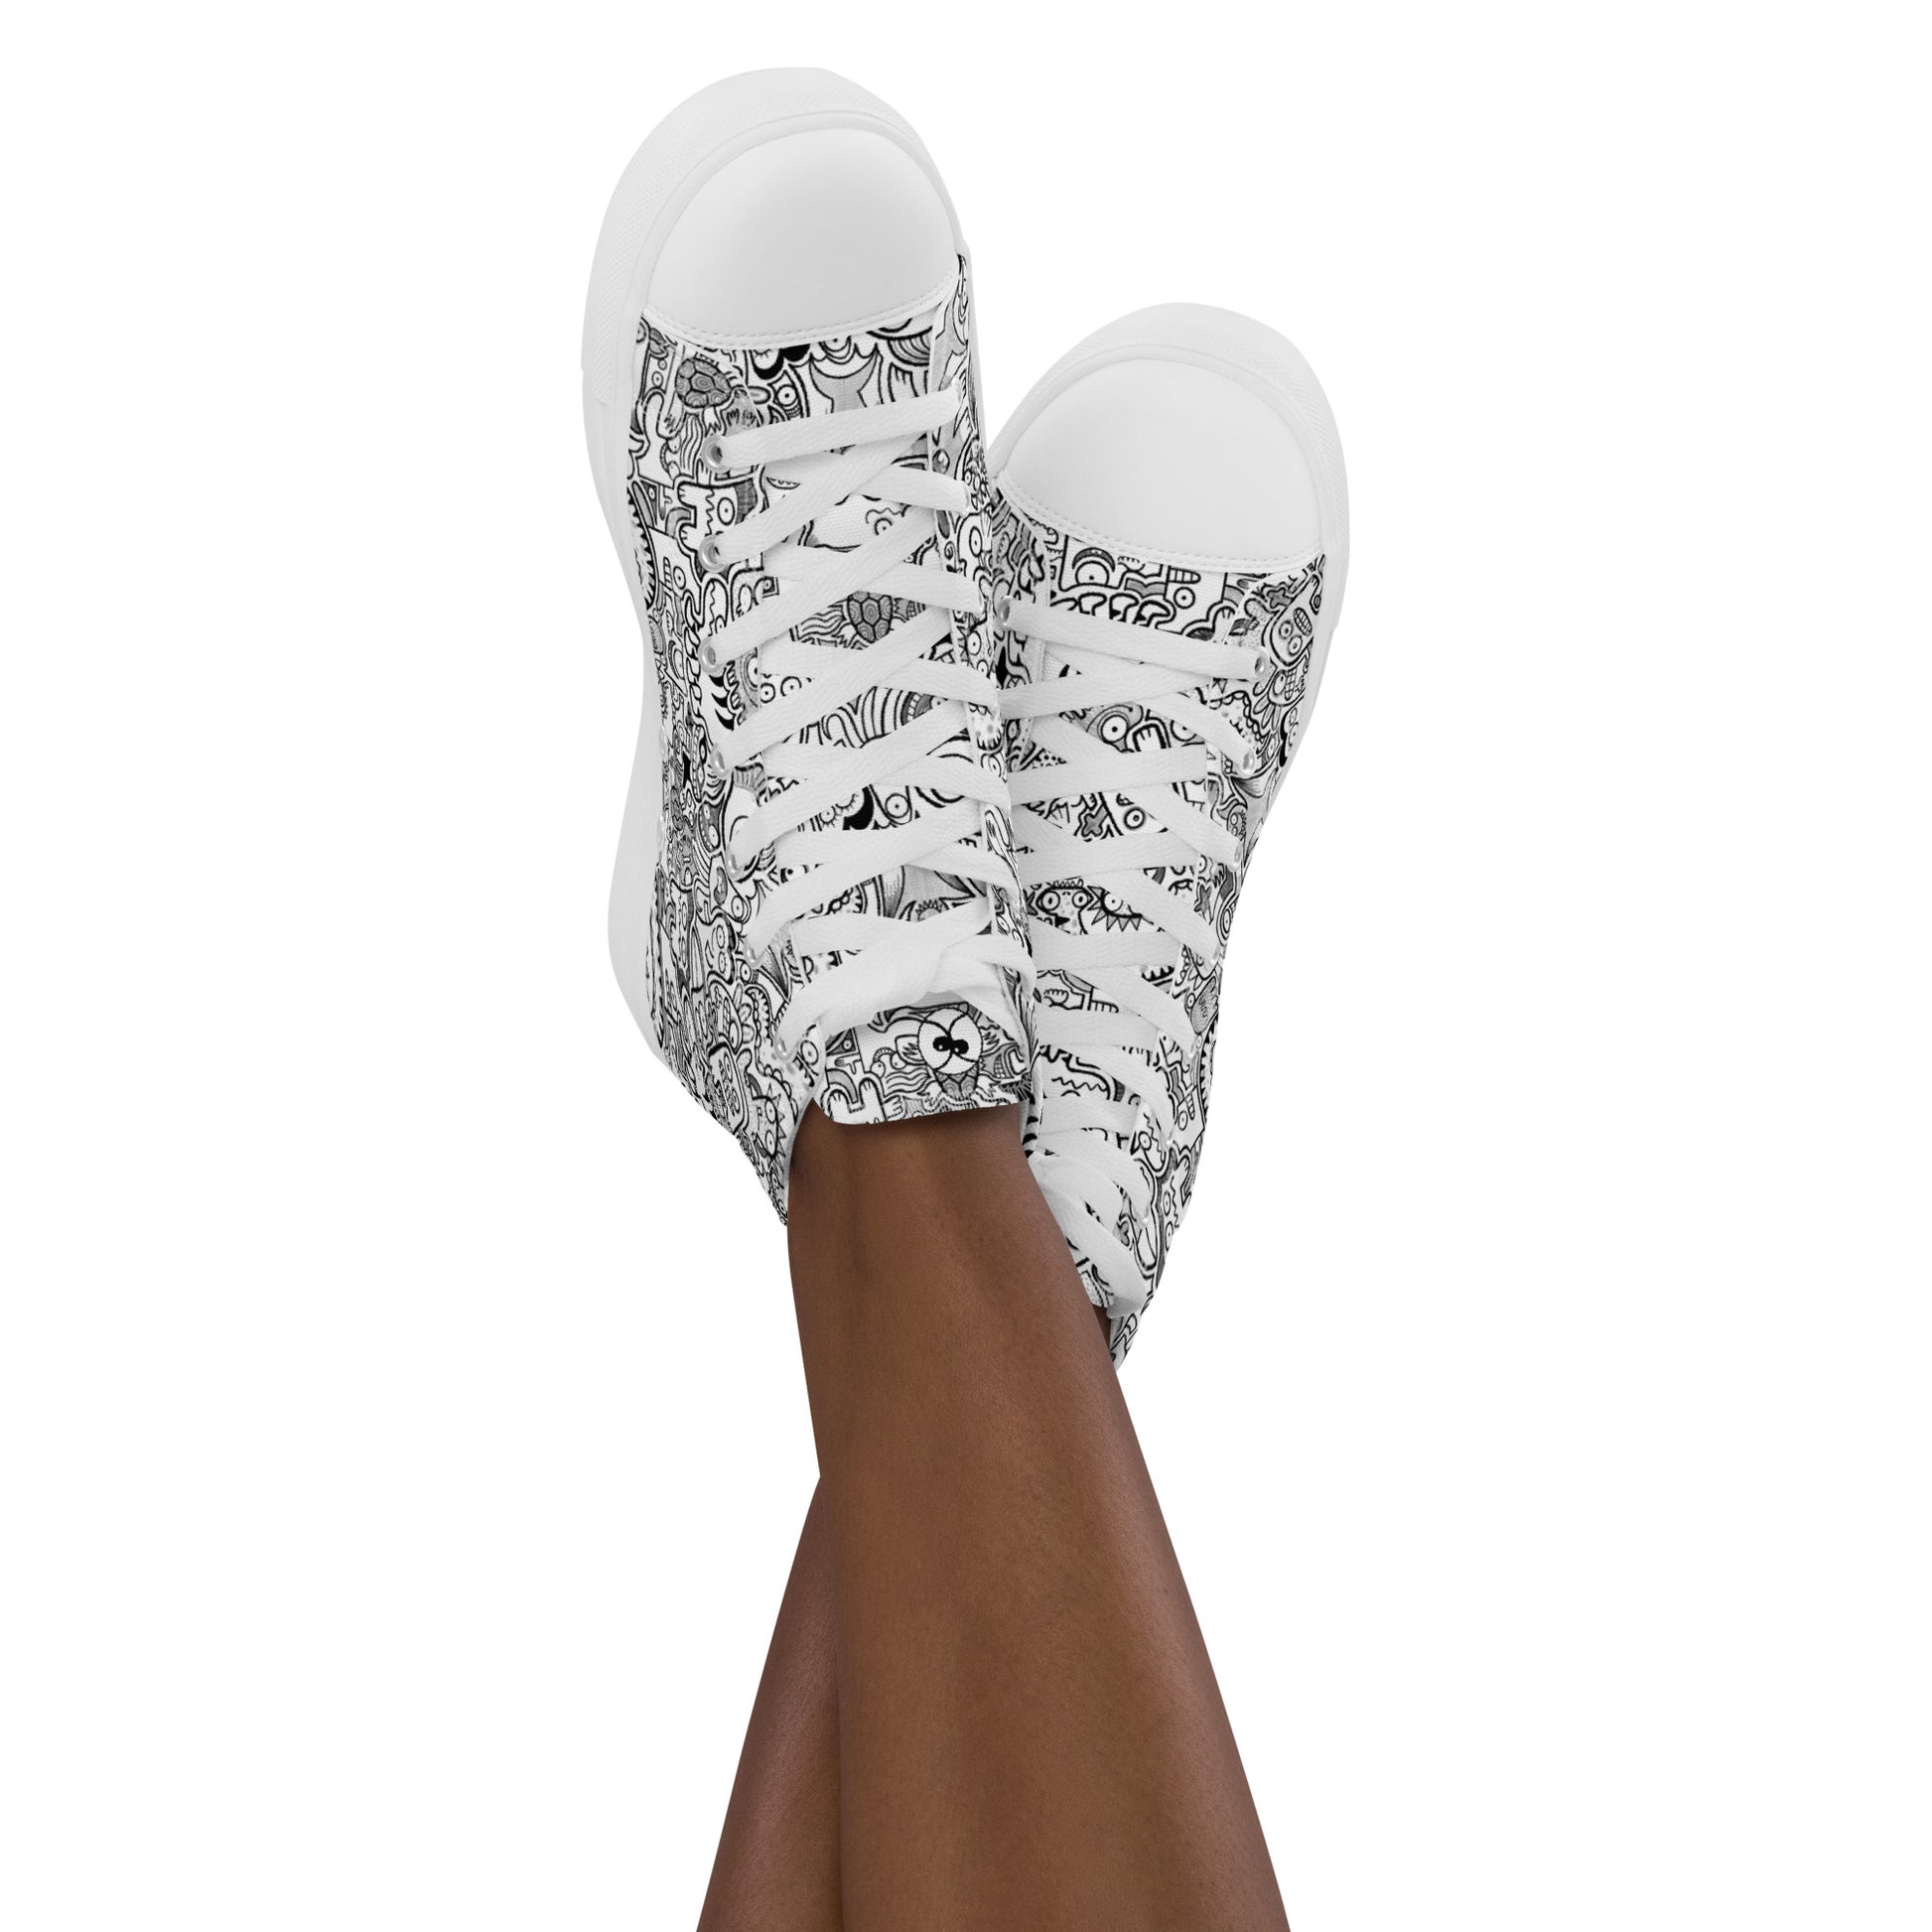 Fill your world with cool doodles Women’s high top canvas shoes. Lifestyle